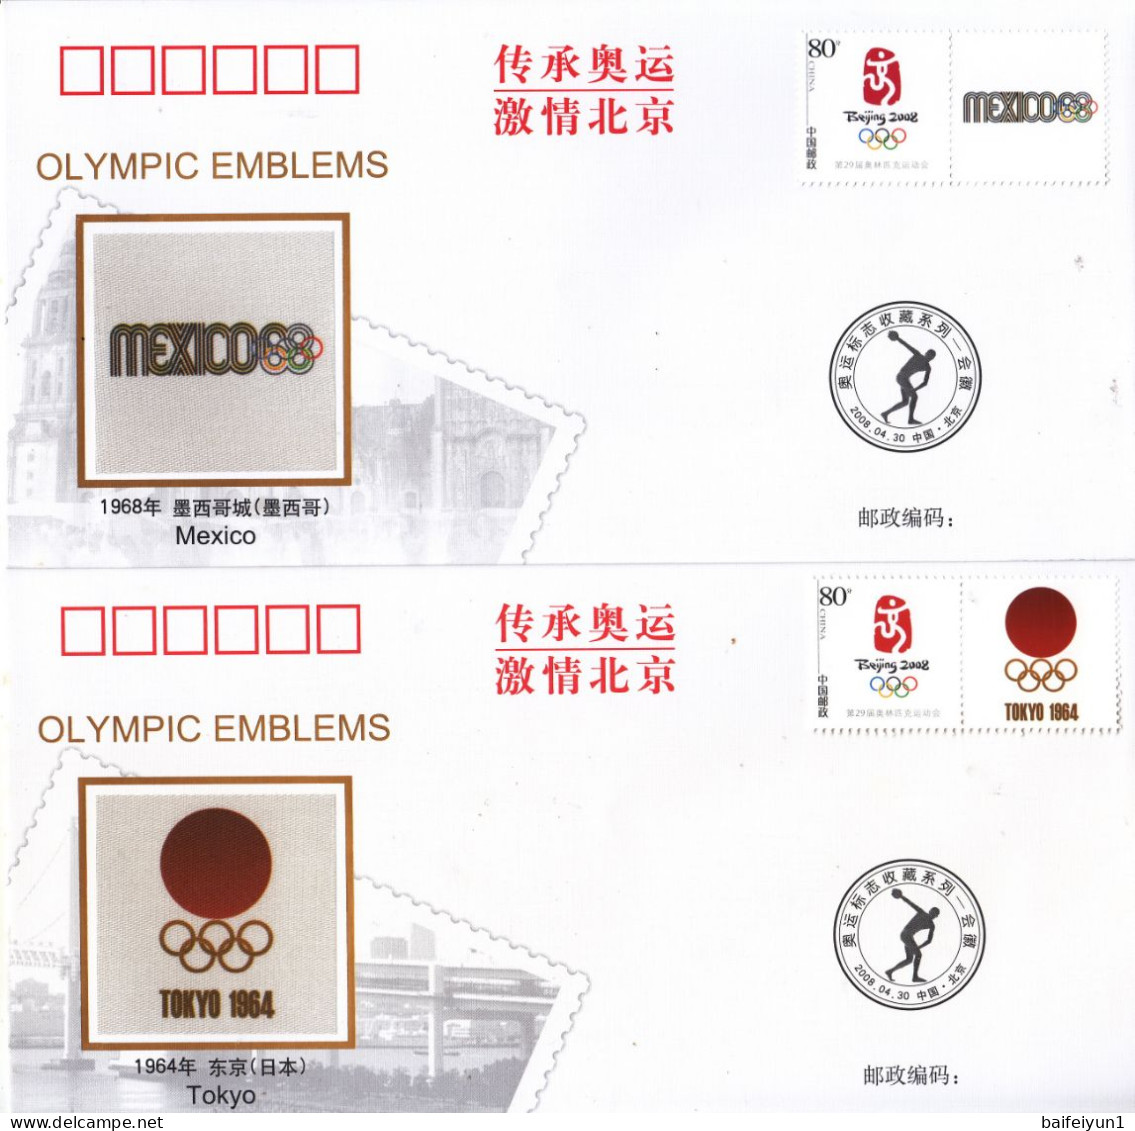 China 2008 Beijing Bearing Olympic Passion(Olympic Emblems)-Commemorative covers(19 sets)